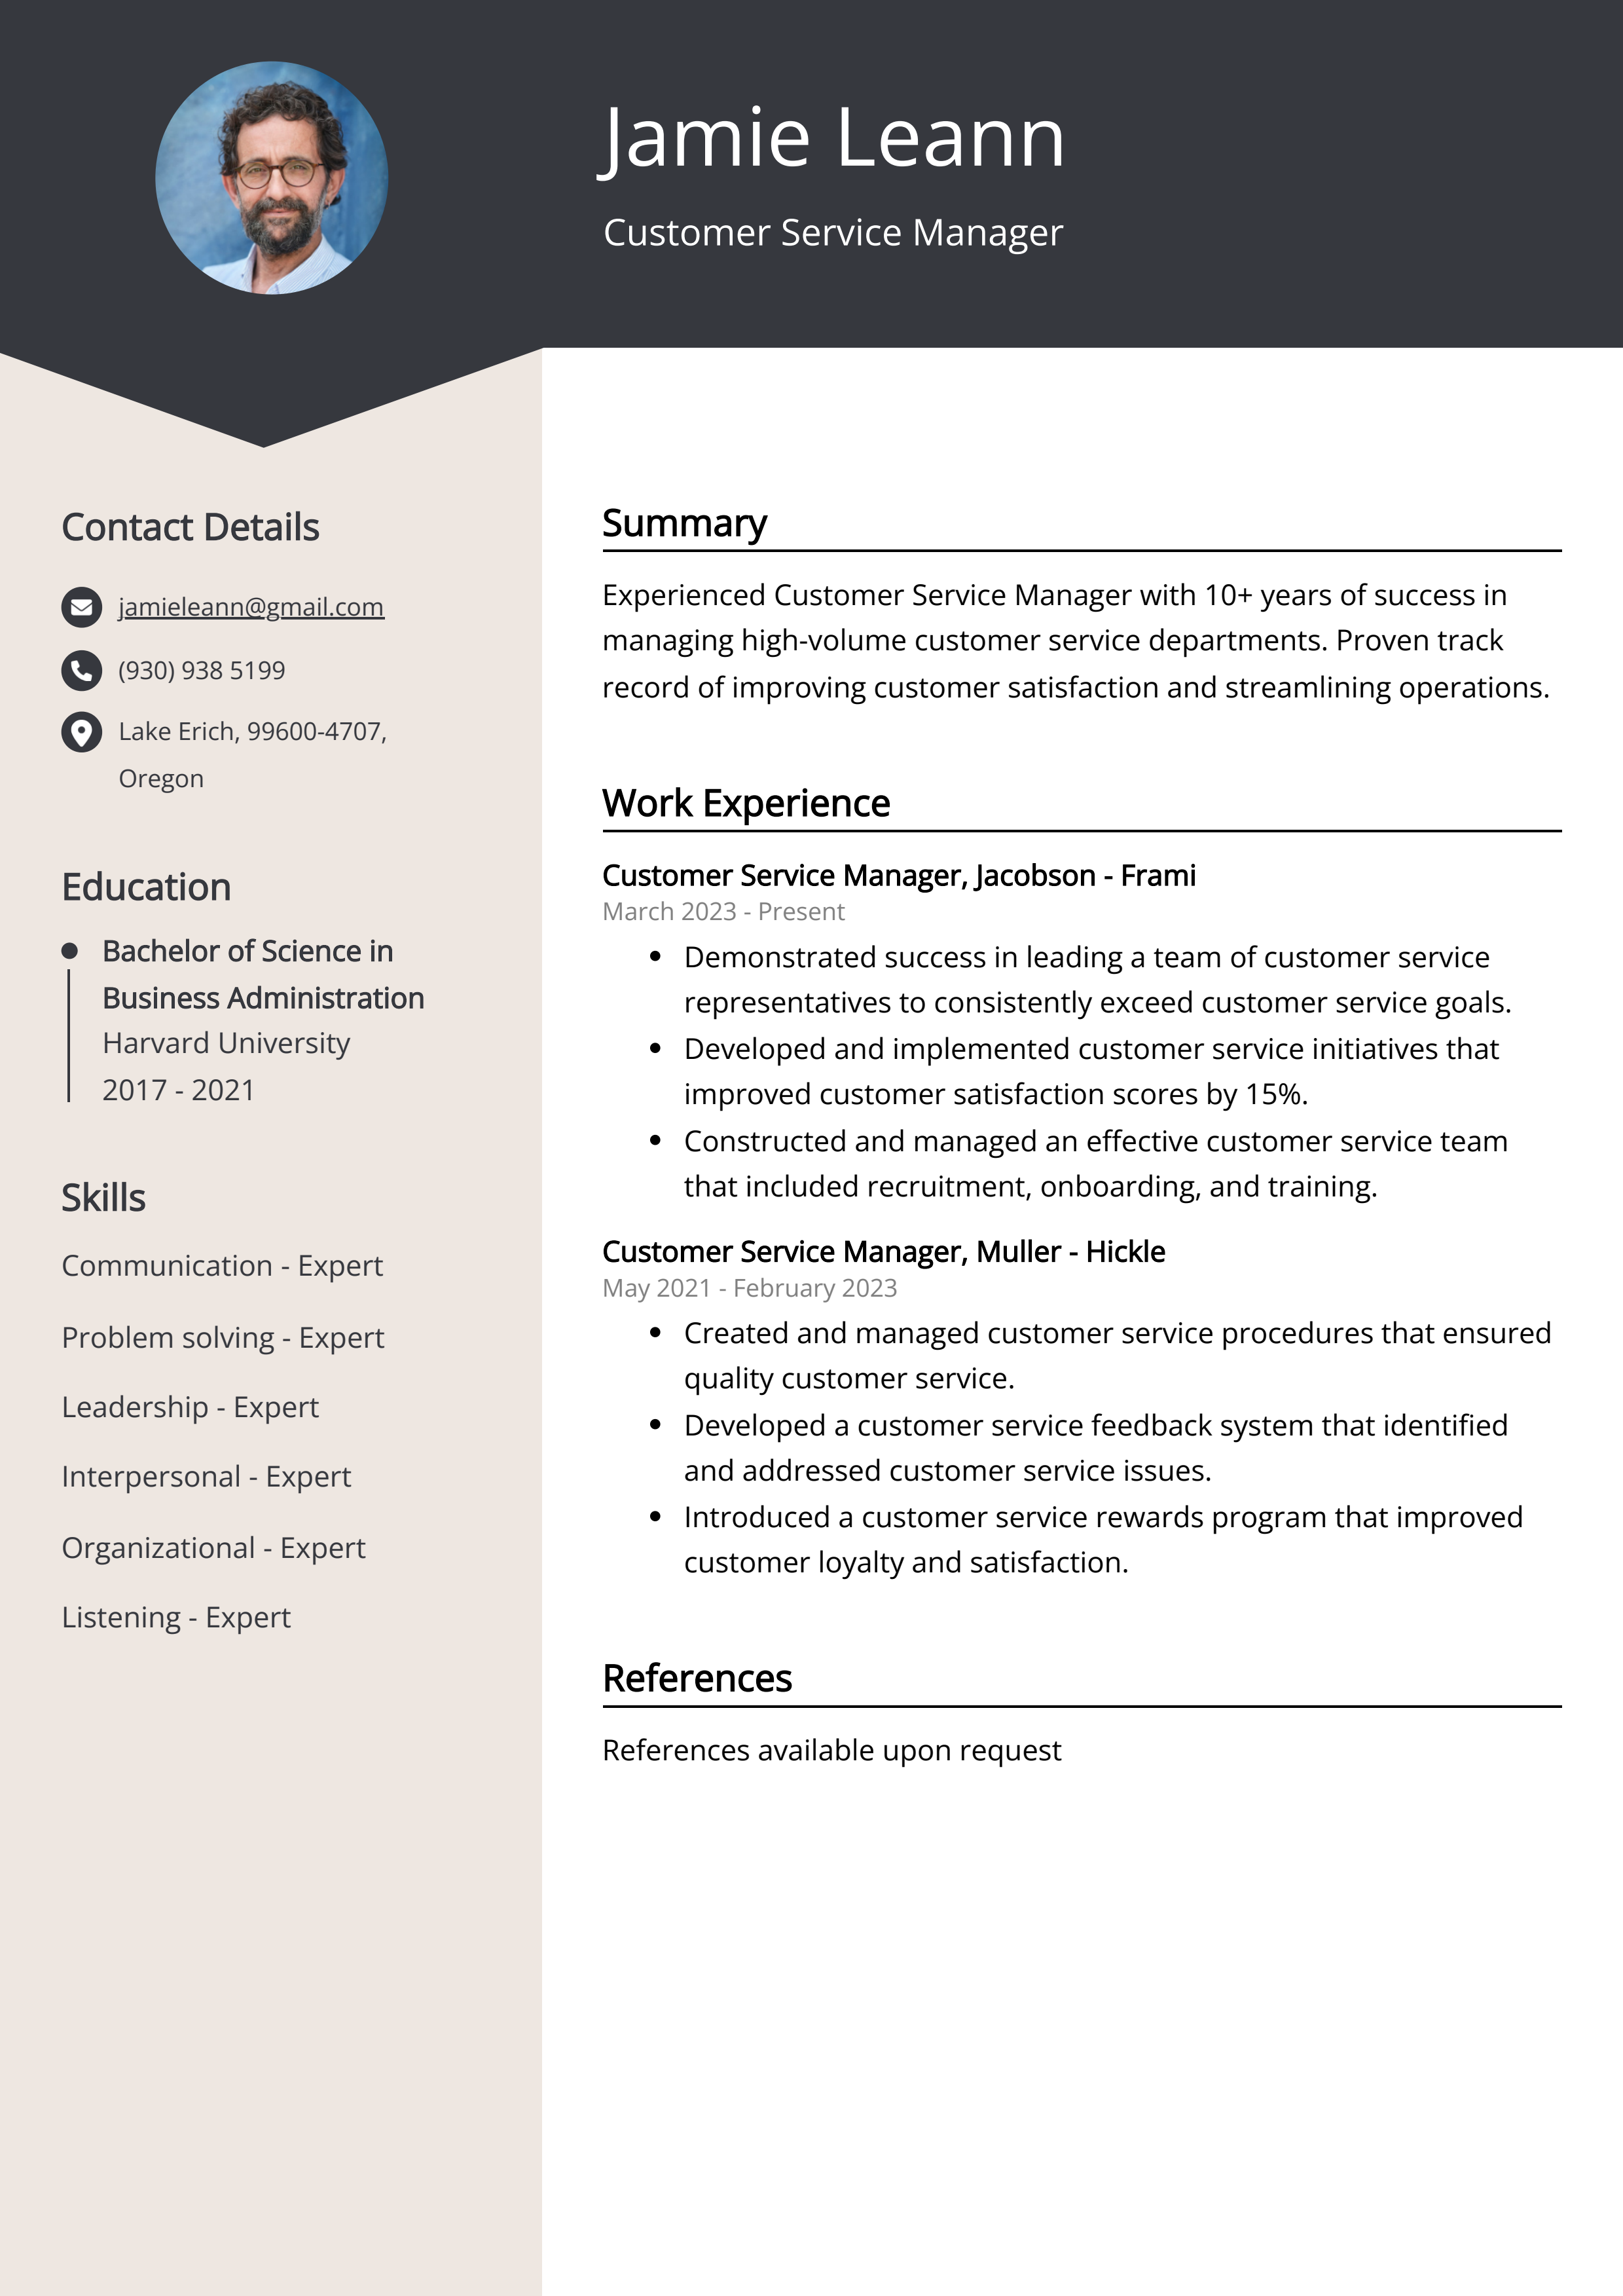 Customer Service Manager CV Example